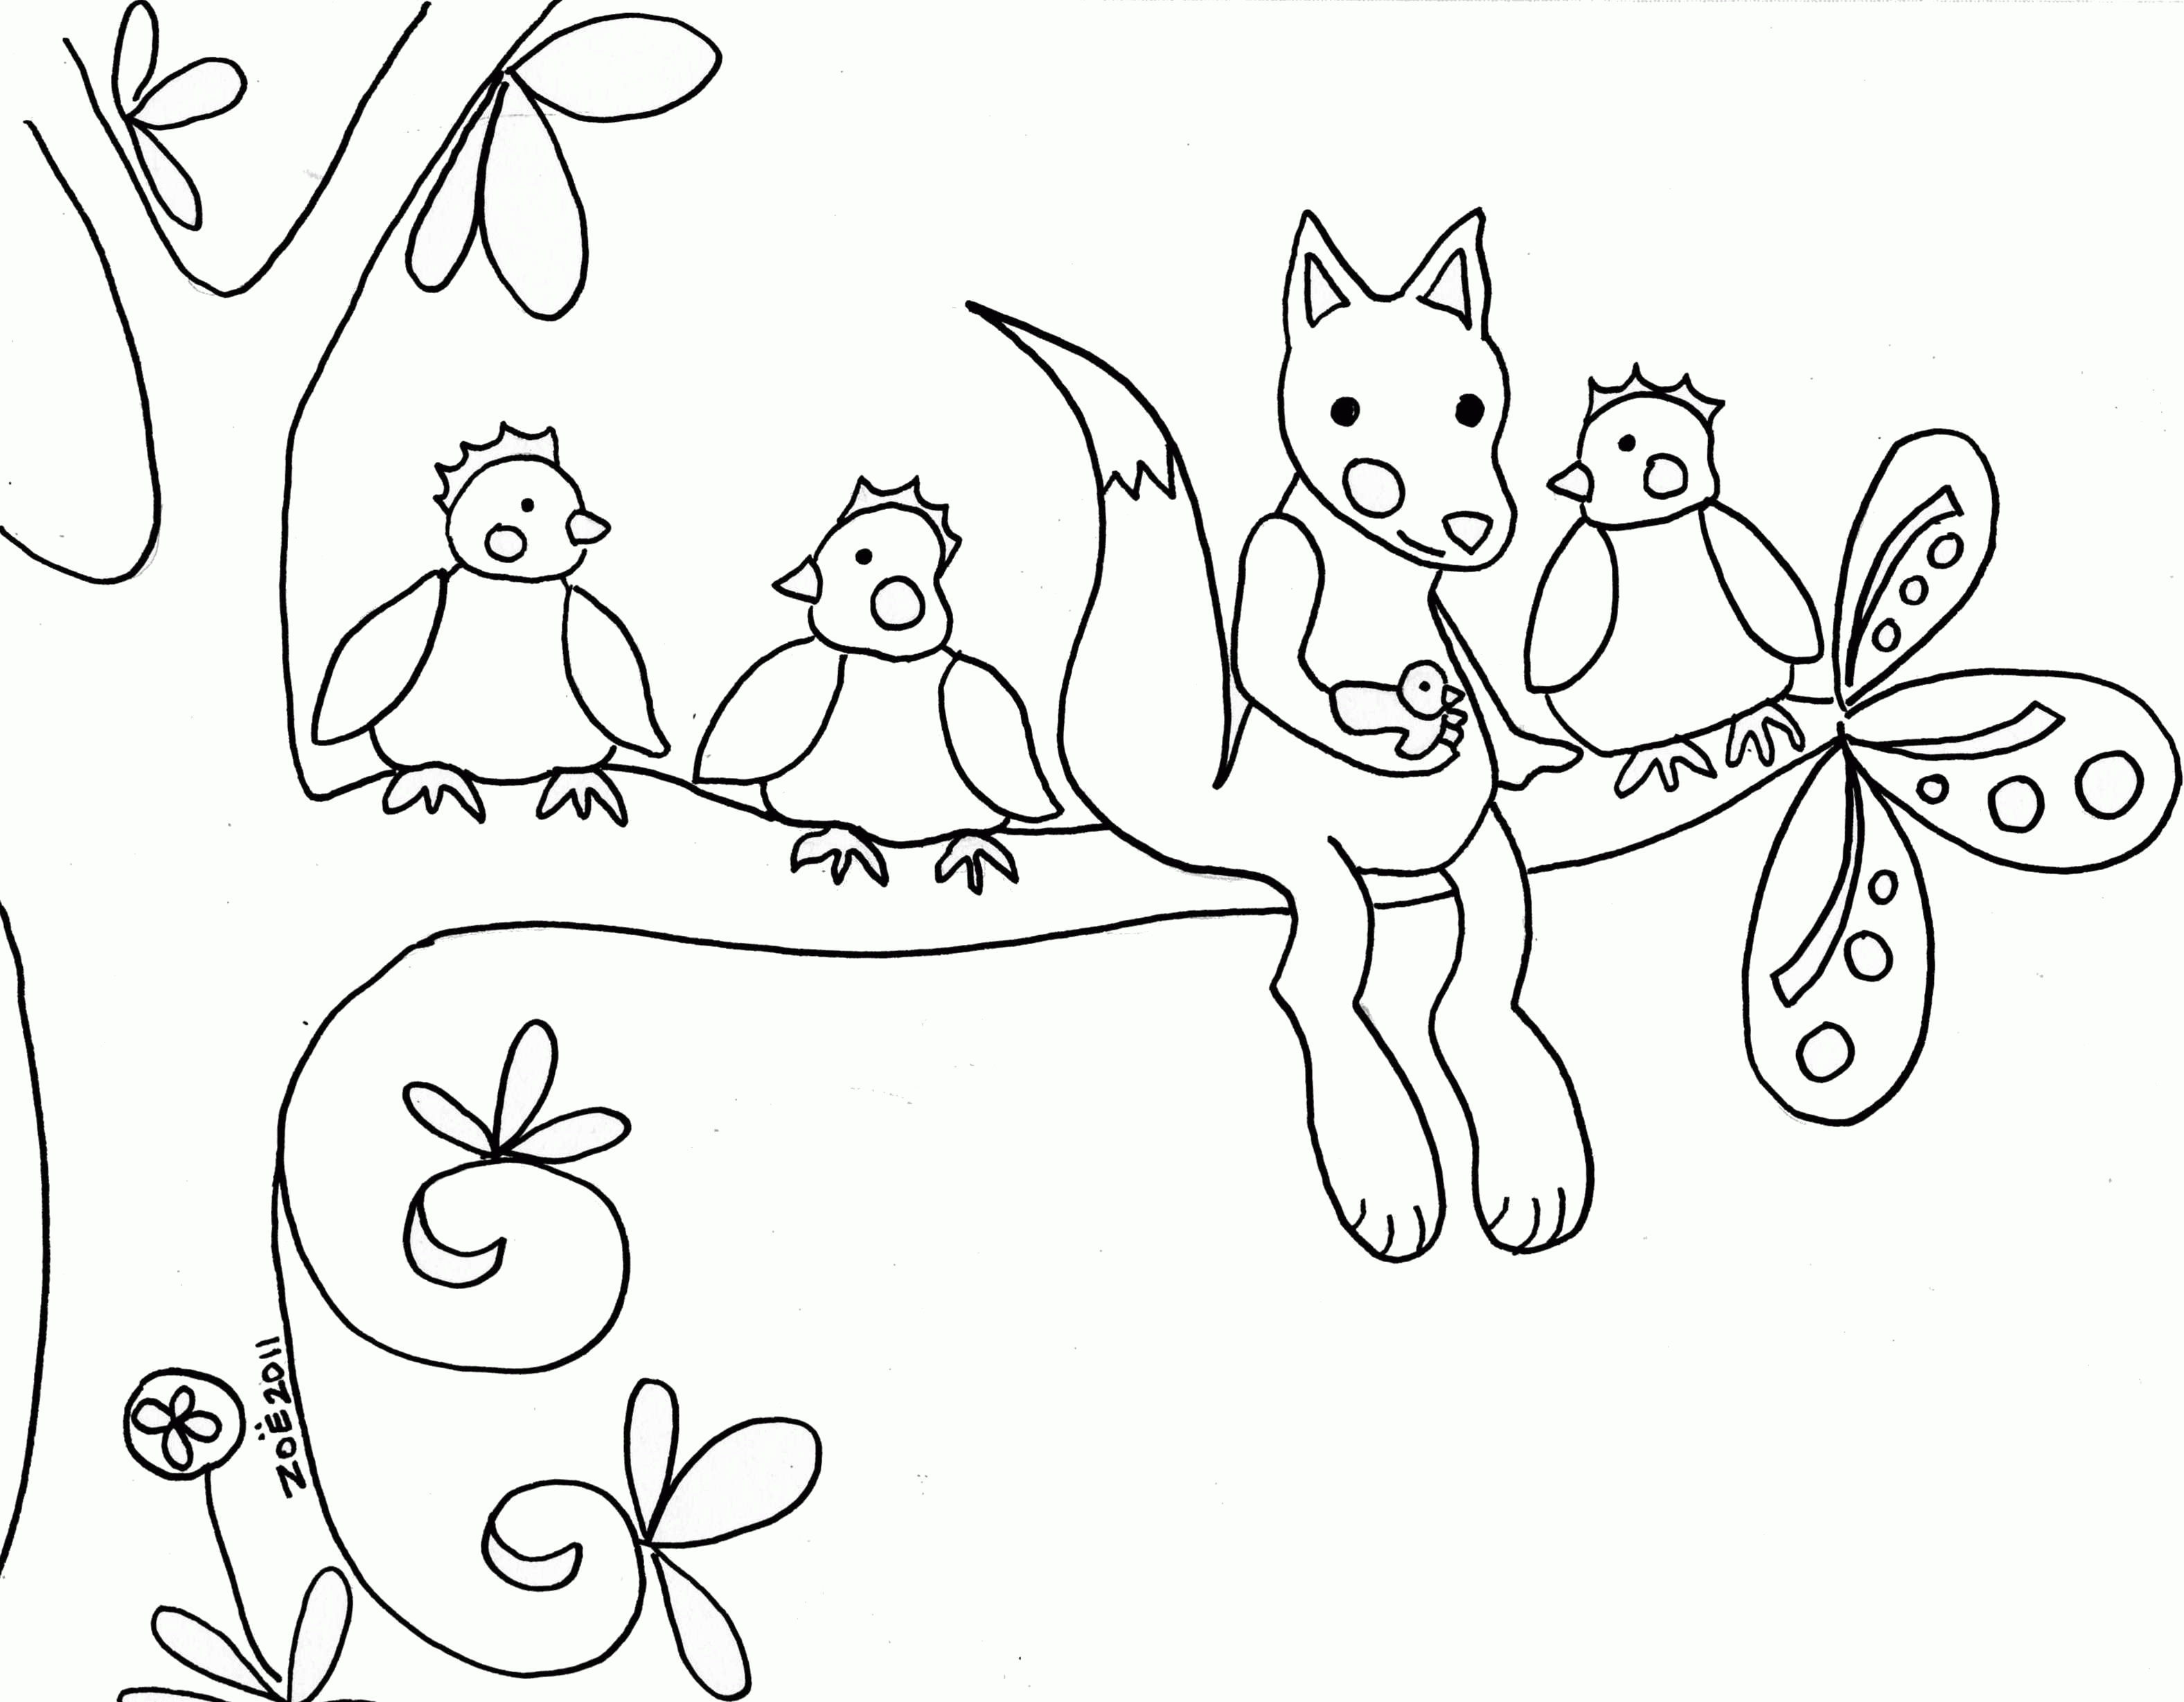 Coloring Book Woodland Animals - 1902+ SVG Images File - Free SVG Cut